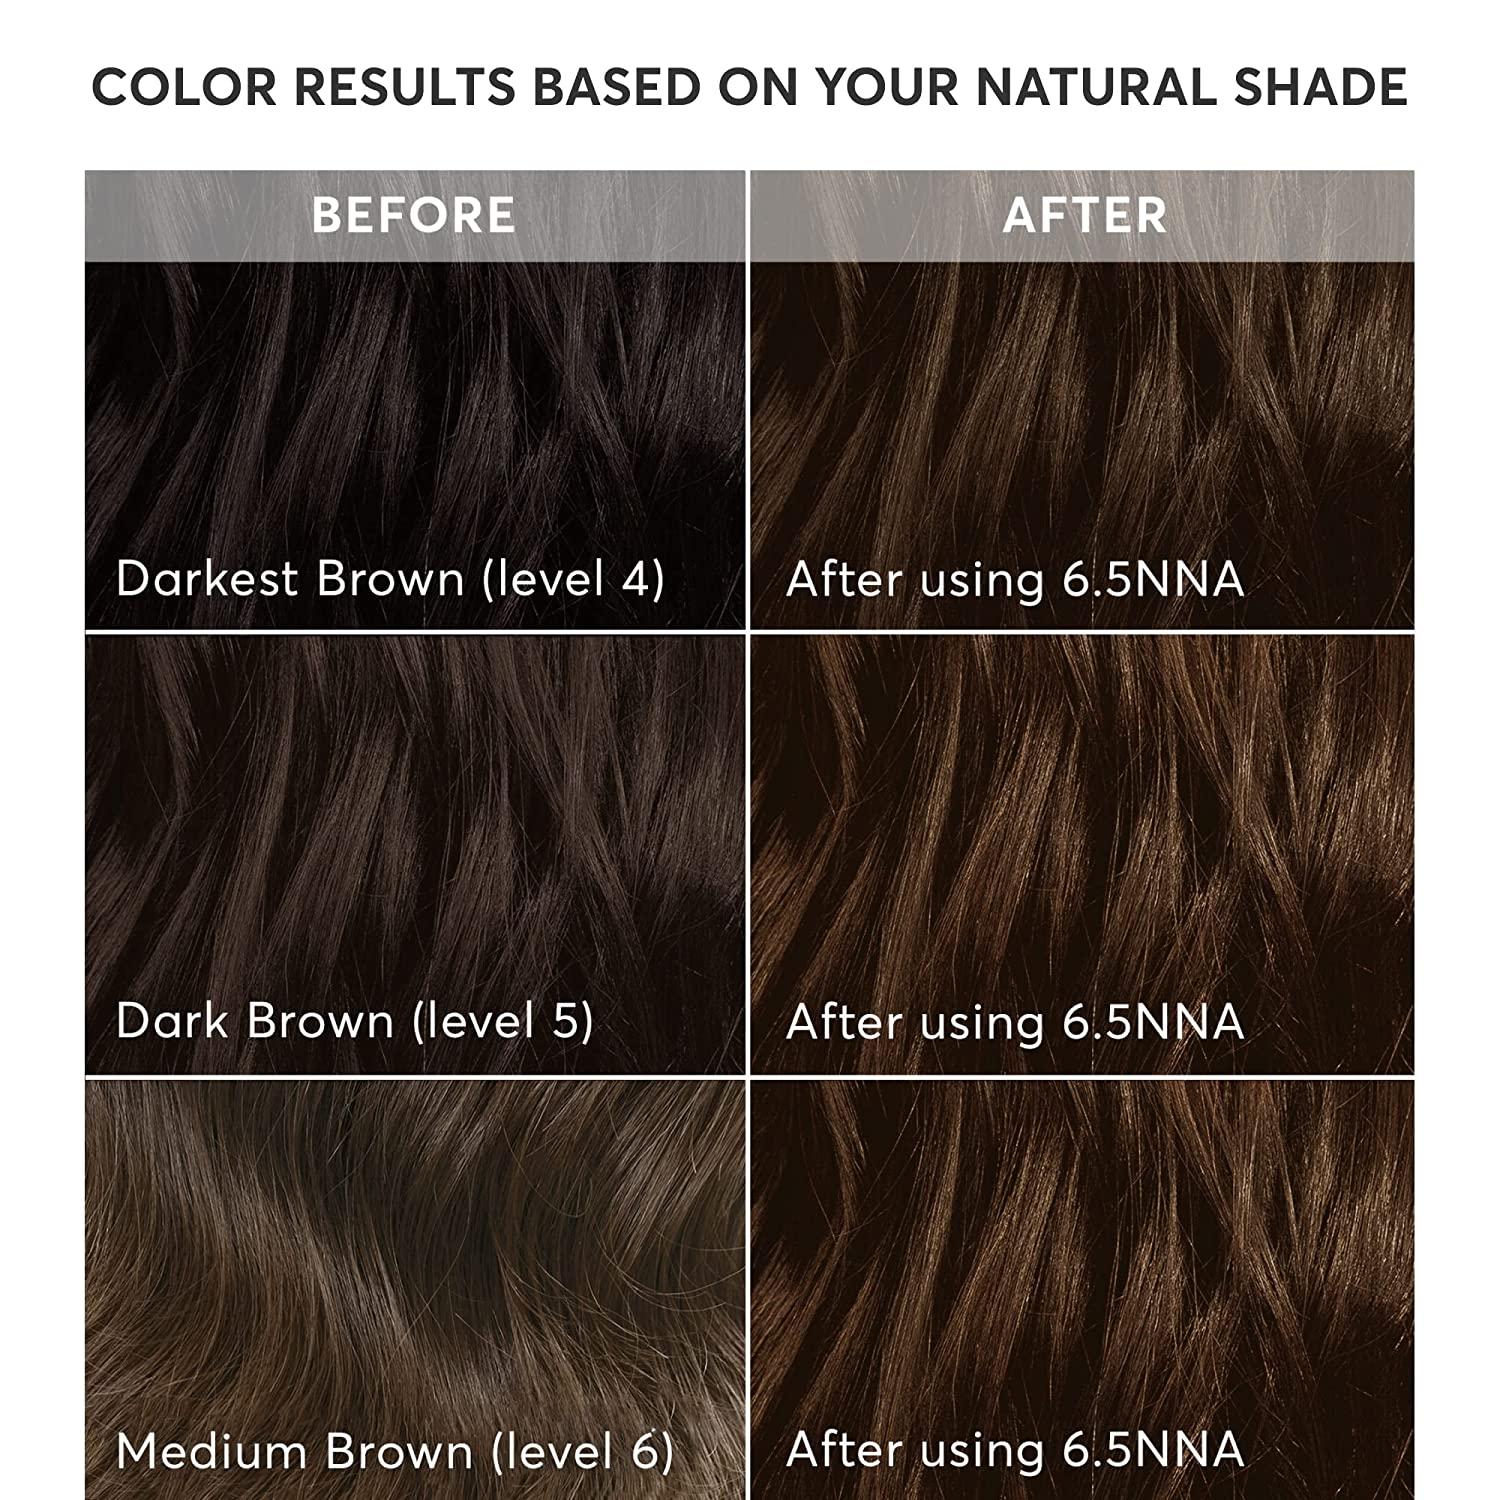 Madison Reed Radiant Hair Color Kit, Permanent Hair Dye, 100% Gray  Coverage, Ammonia-Free, Sondrio Brown 6.5NNA Soft Medium Neutral Brown for  Resistant Grays, Pack of 1 1 Count (Pack of 1) Sondrio Brown - 6.5NNA